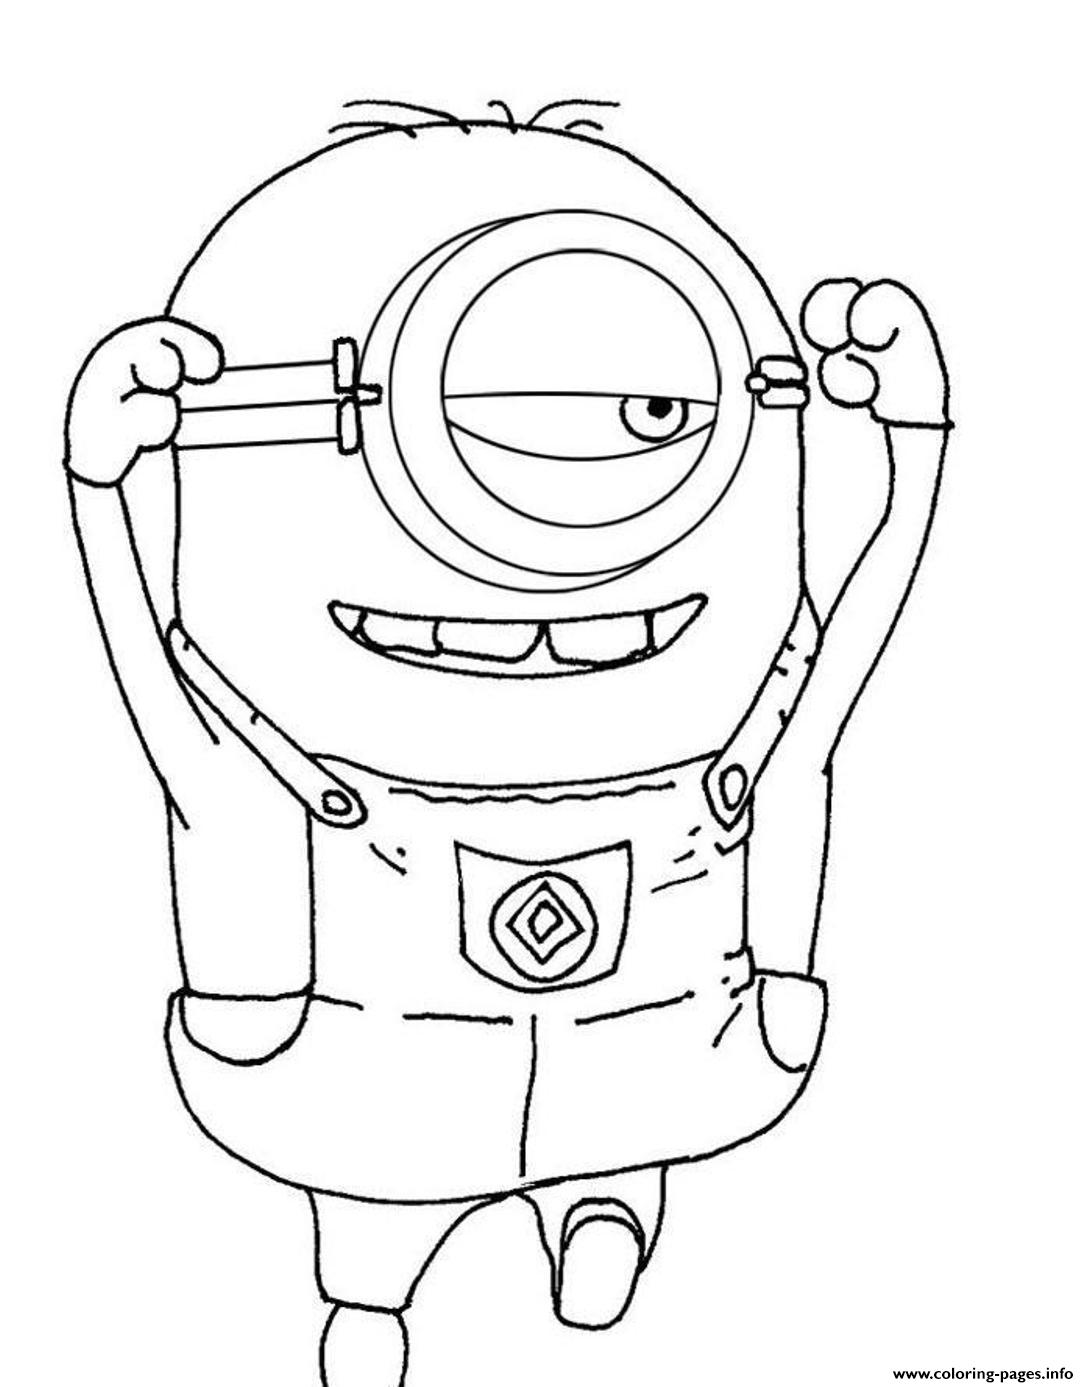 Despicable Me S Minion For Kids Freedab4 coloring